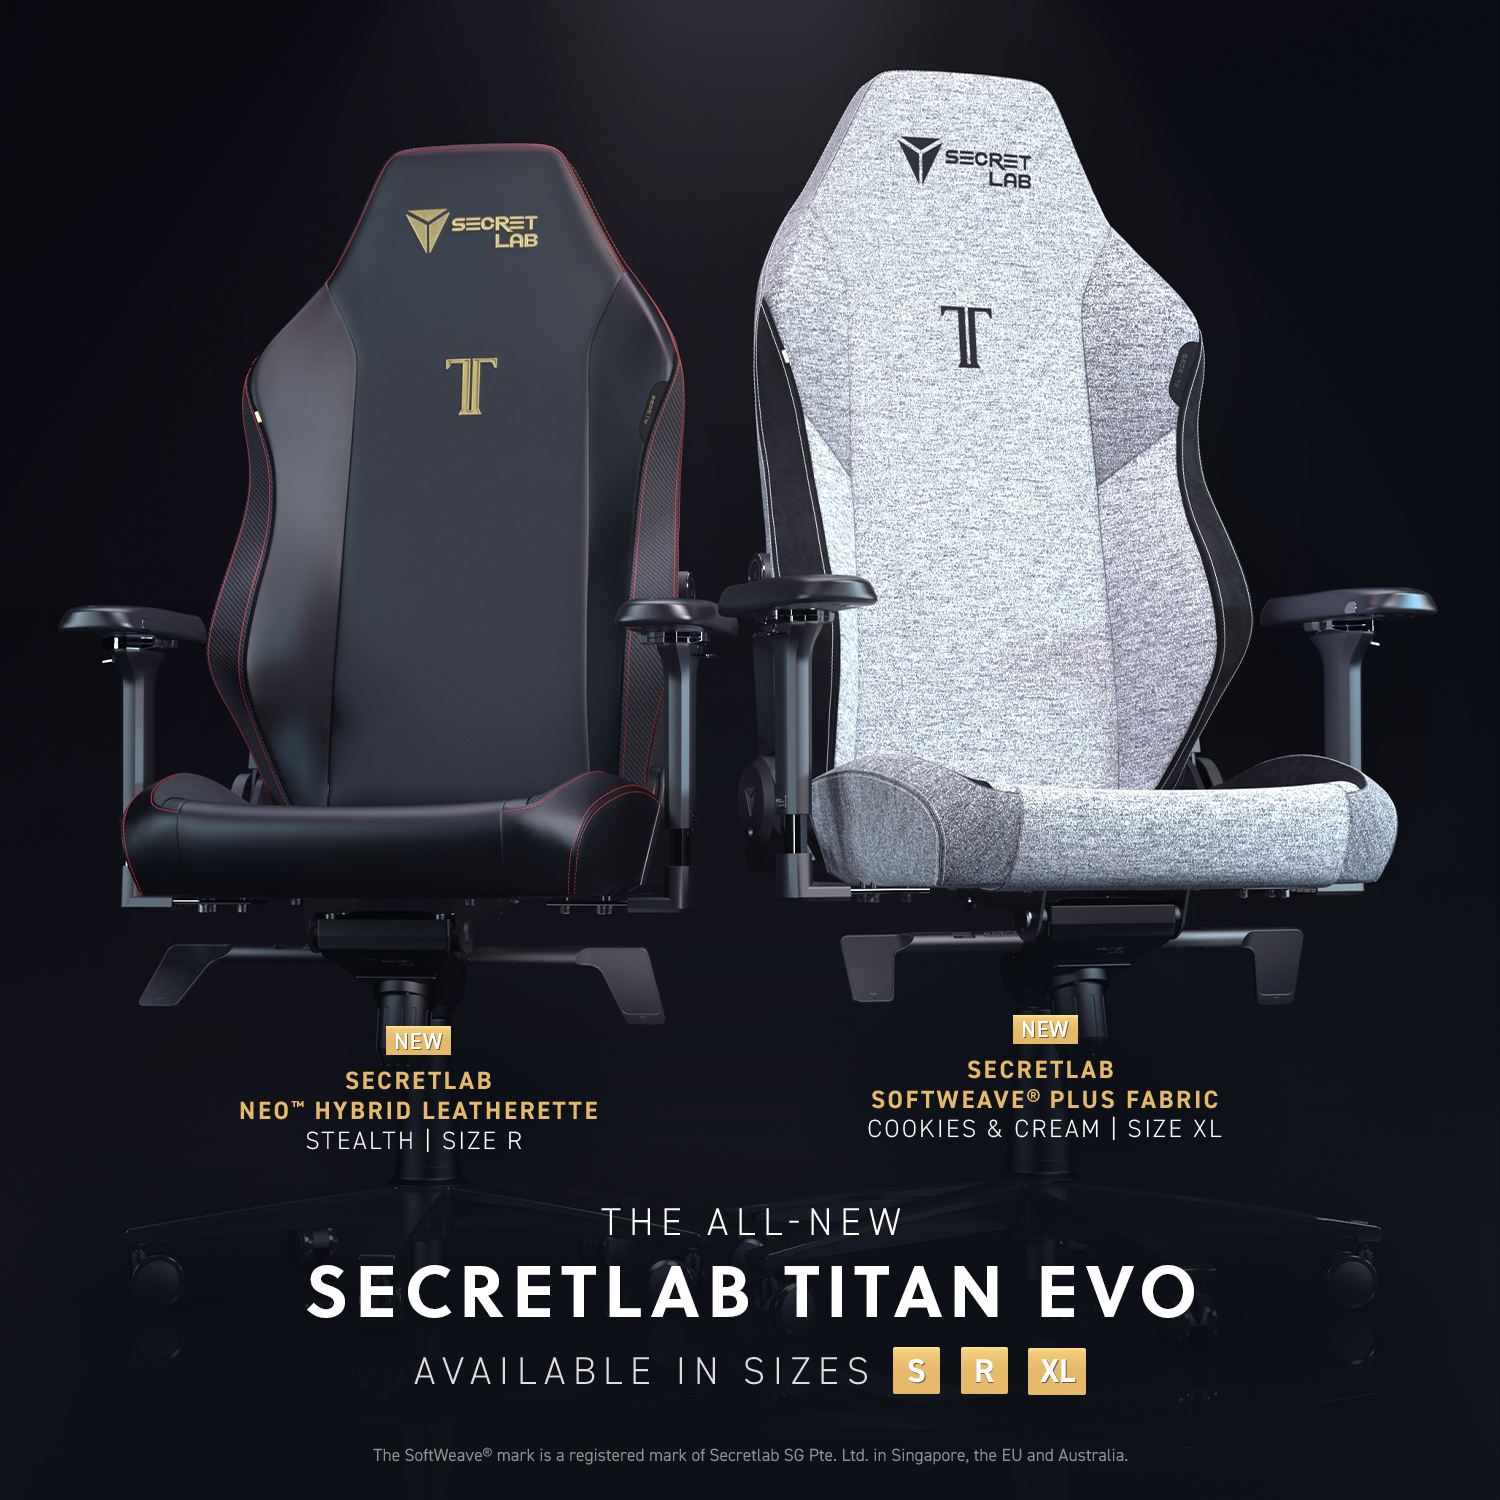 Secretlab Footrest: Here's What You Can Actually Do